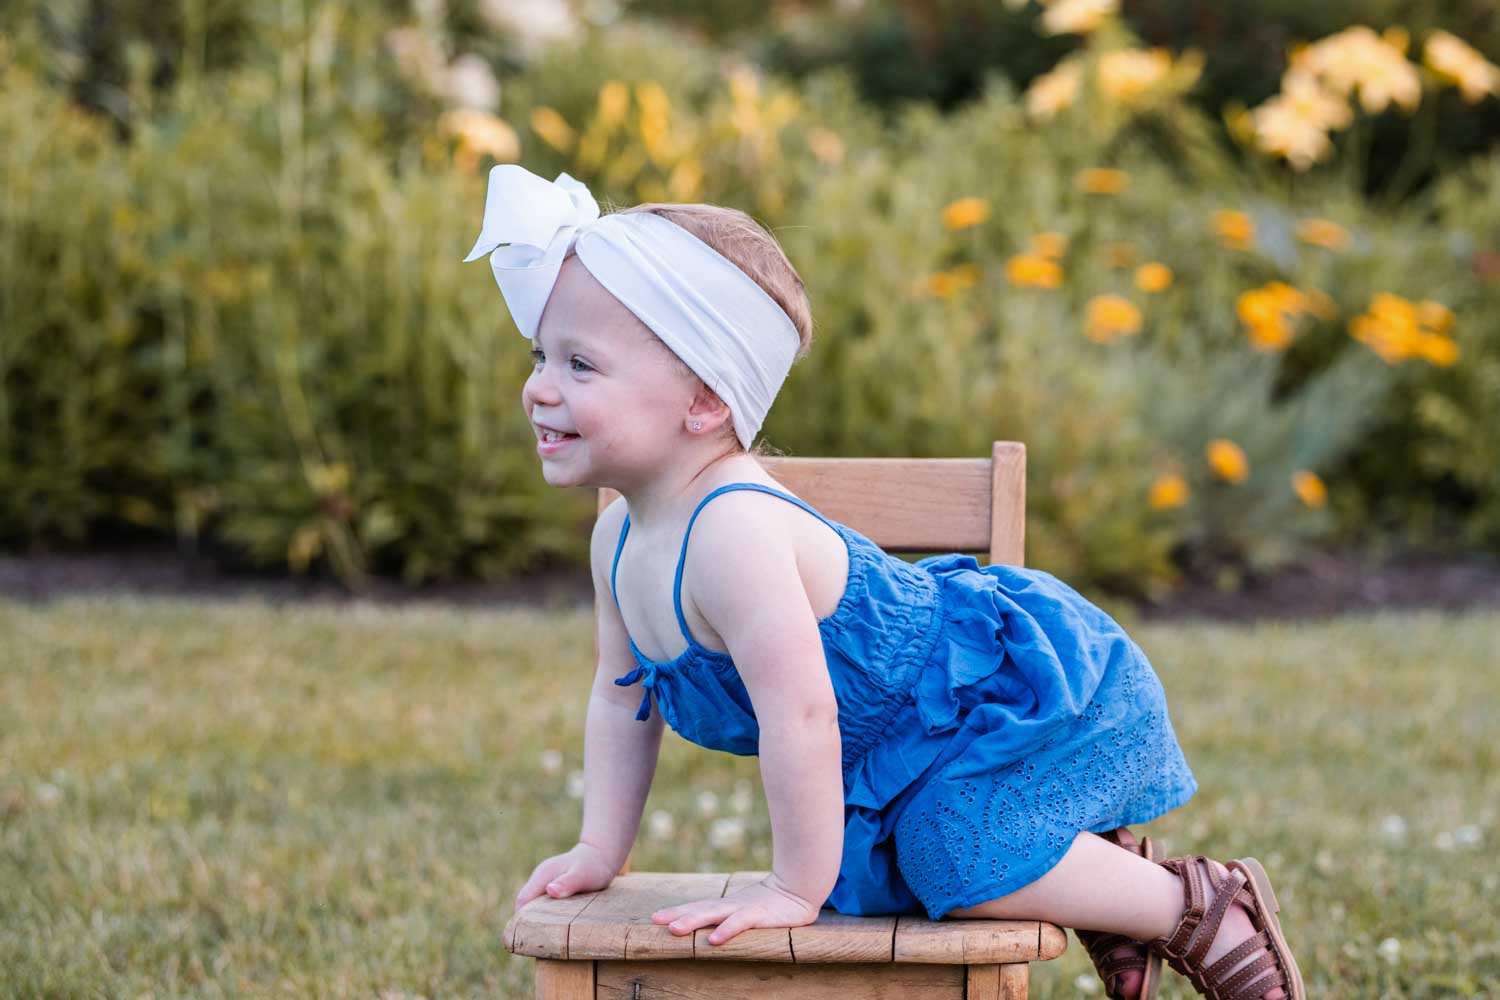 Toddler girl sitting on a chair smiling with white bow in her hair